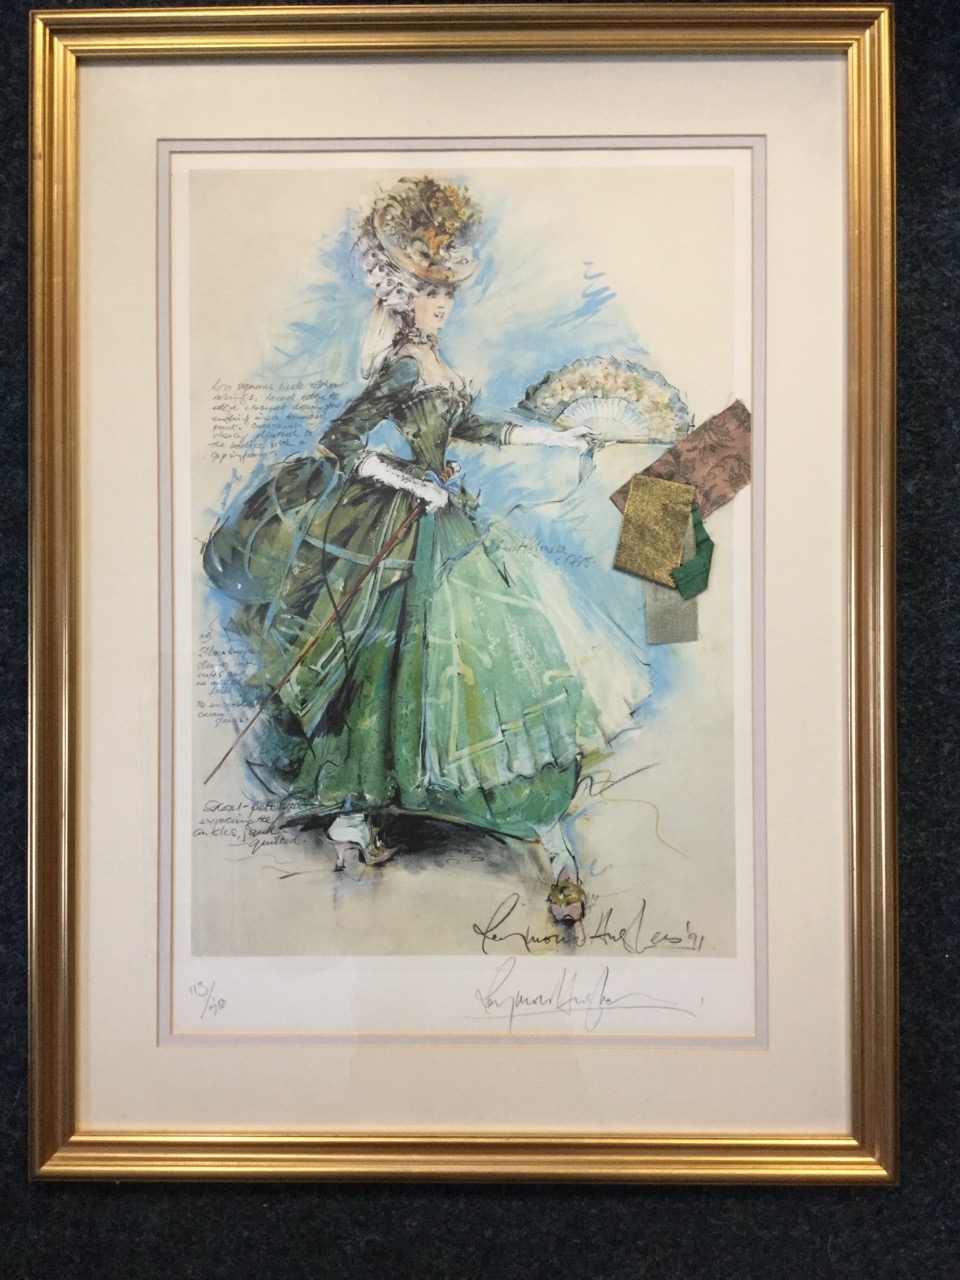 Raymond Hughes, lithographic print, costume design with fabric samples, signed and numbered in